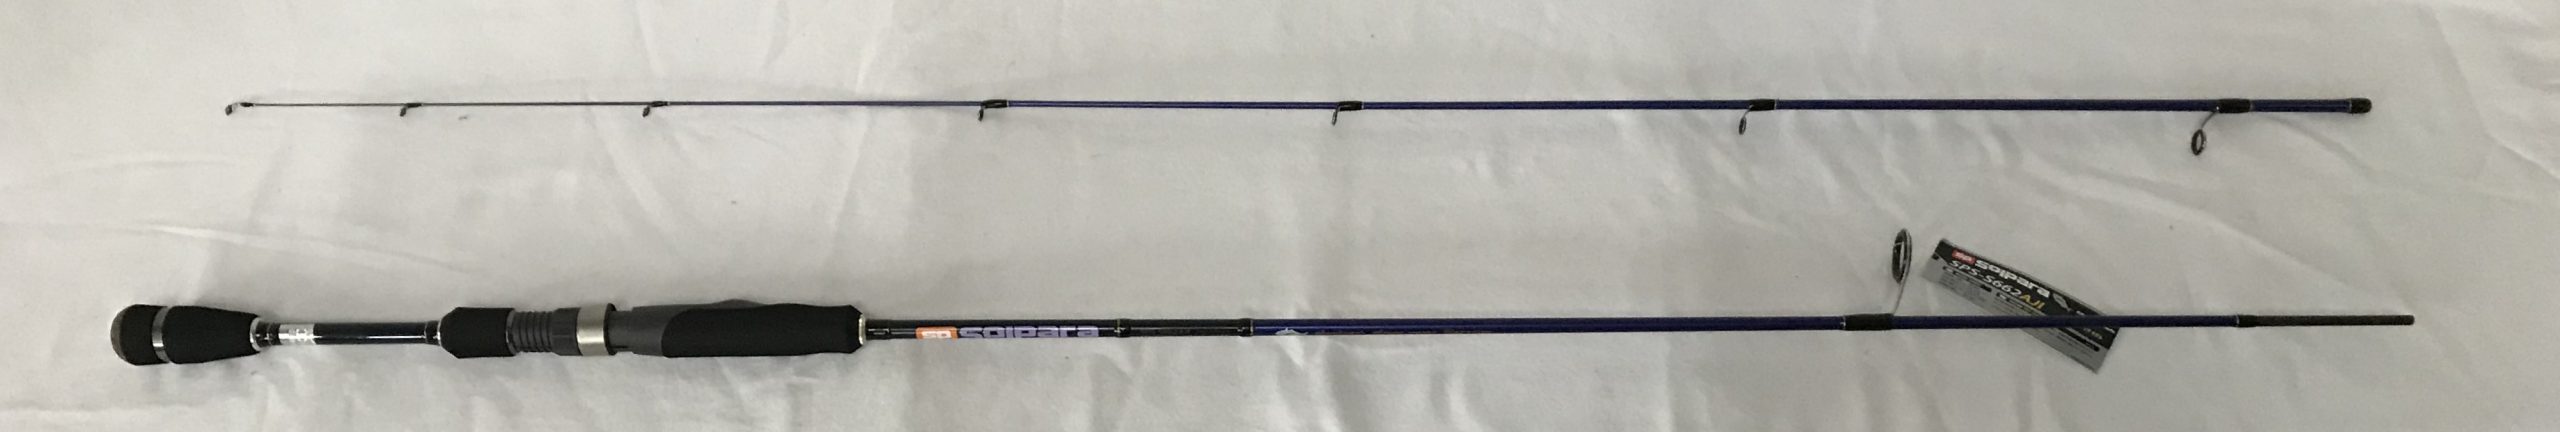 Major Craft Solpara Ajing SPS-S662 AJI Spinning Rod (To be updated